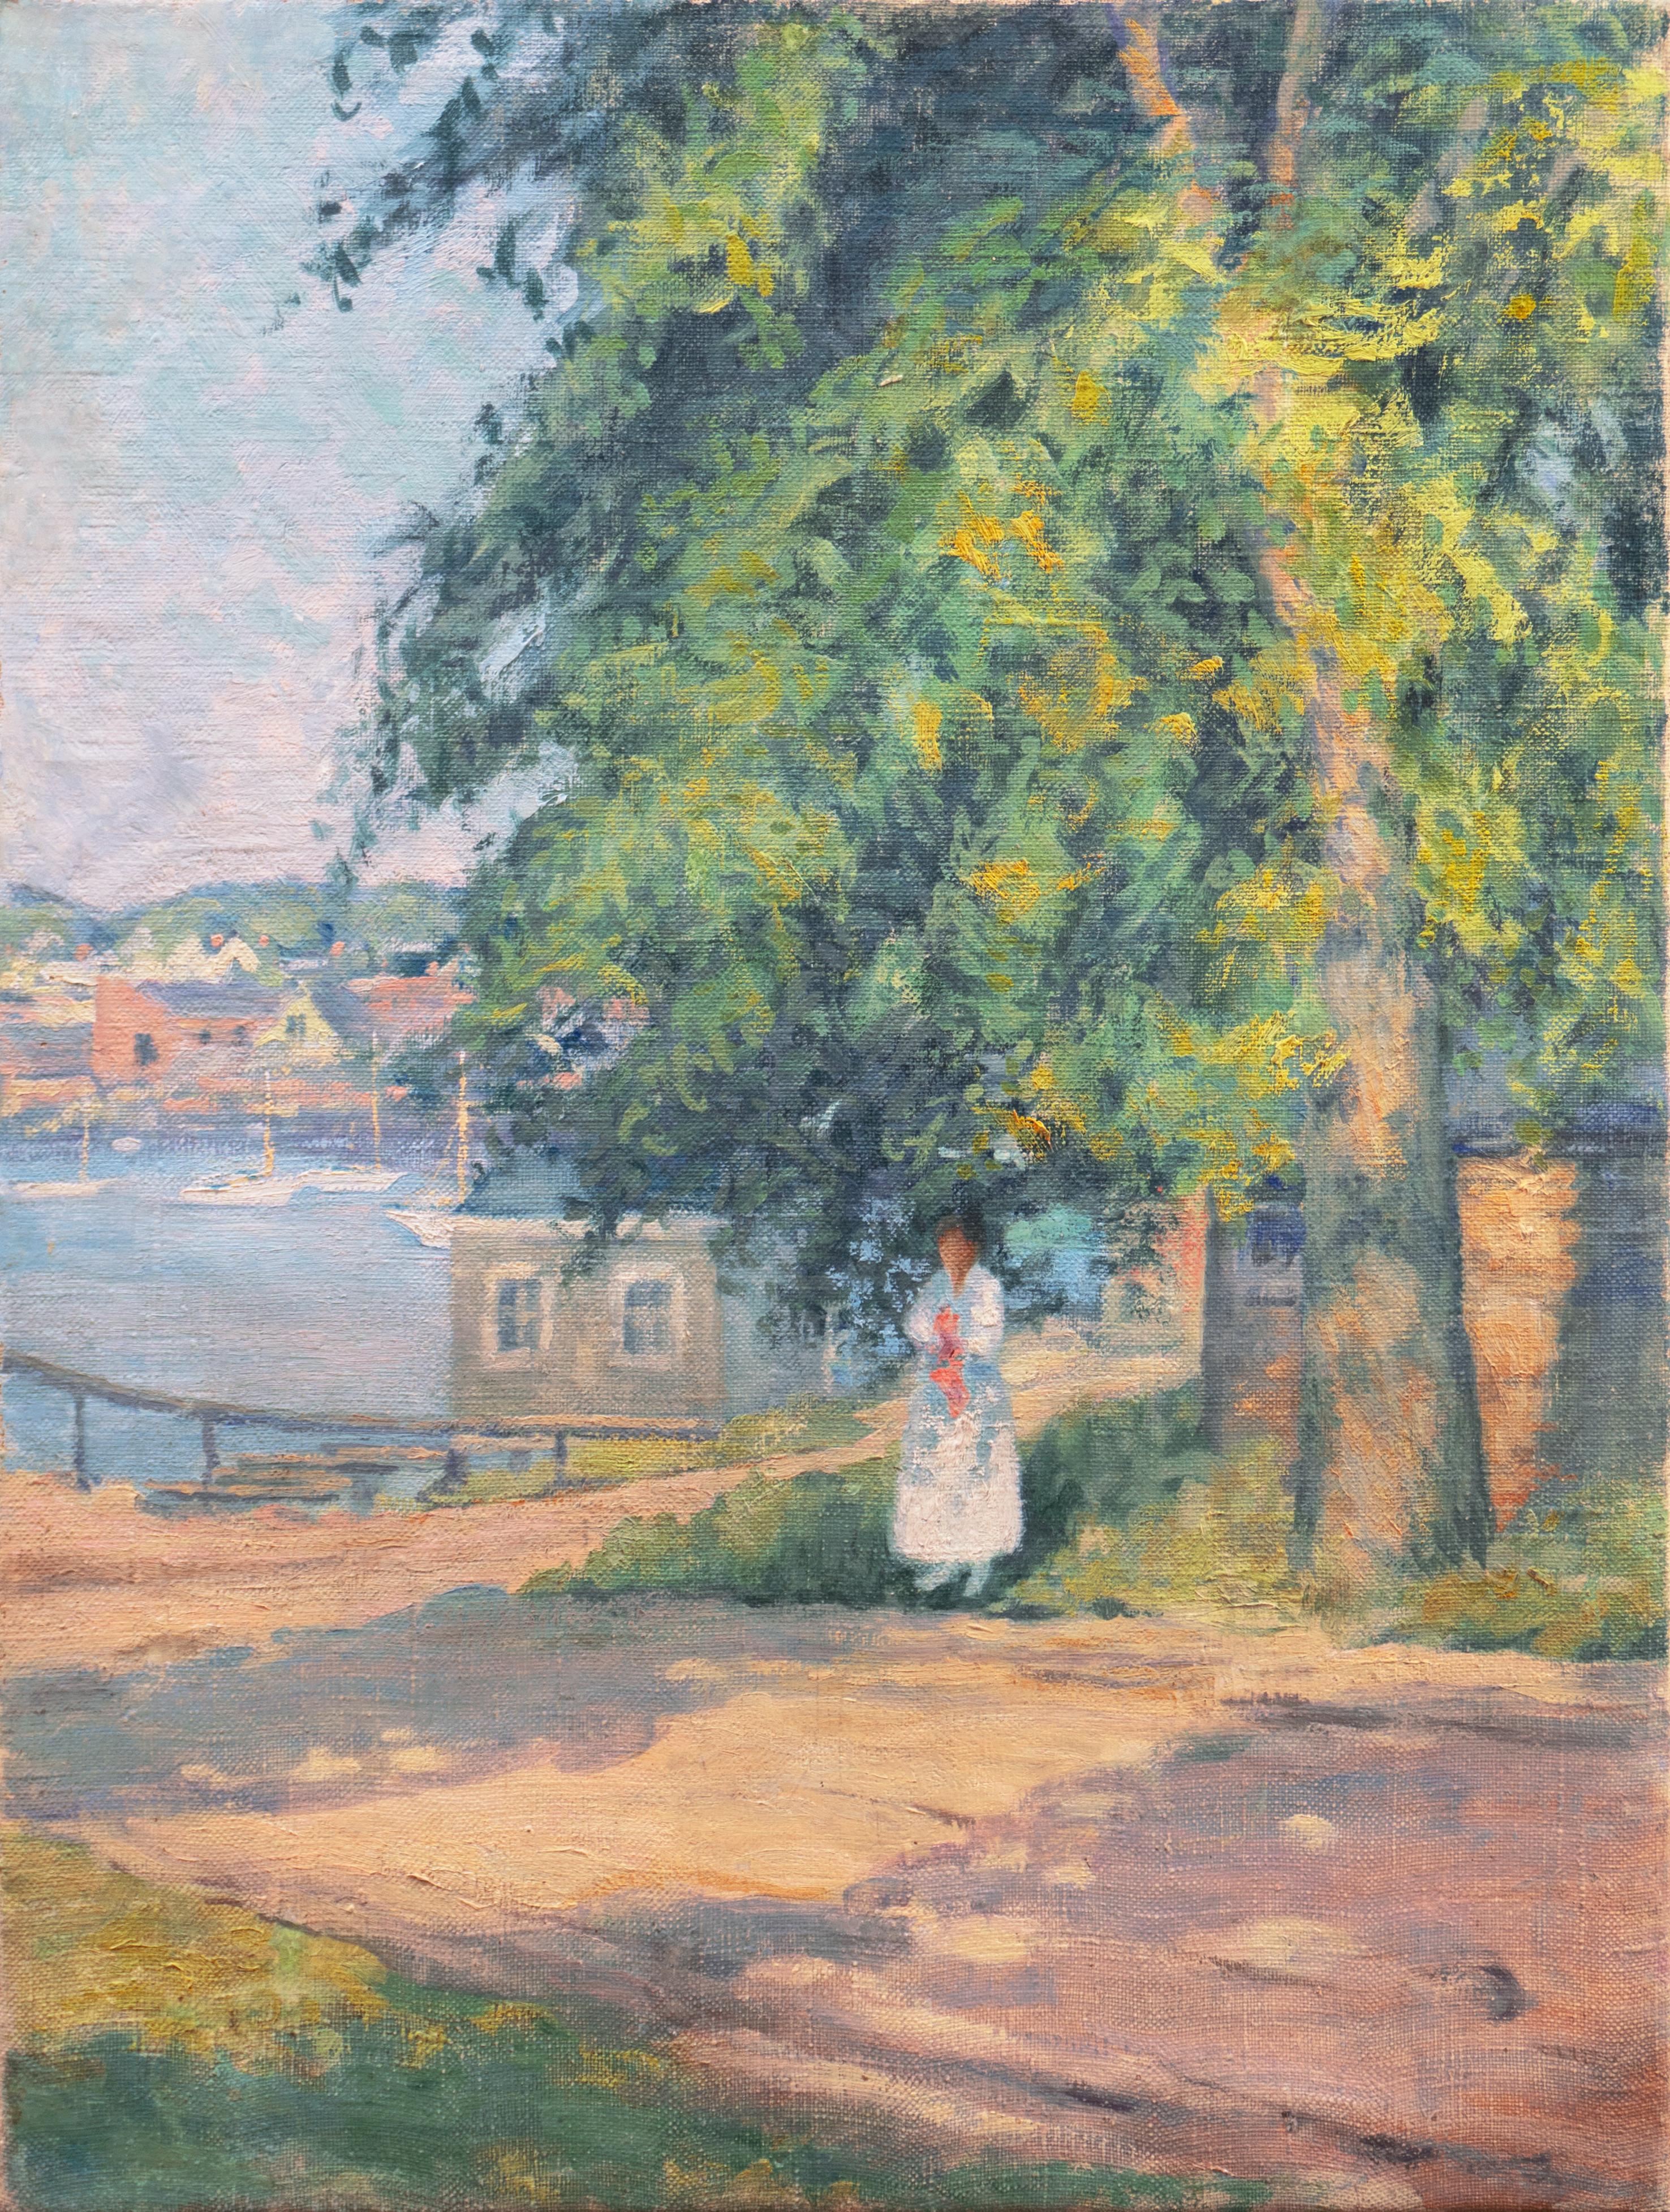 American School Landscape Painting - 'Waiting in the Shade', Early 20th Century American Impressionist School Figural